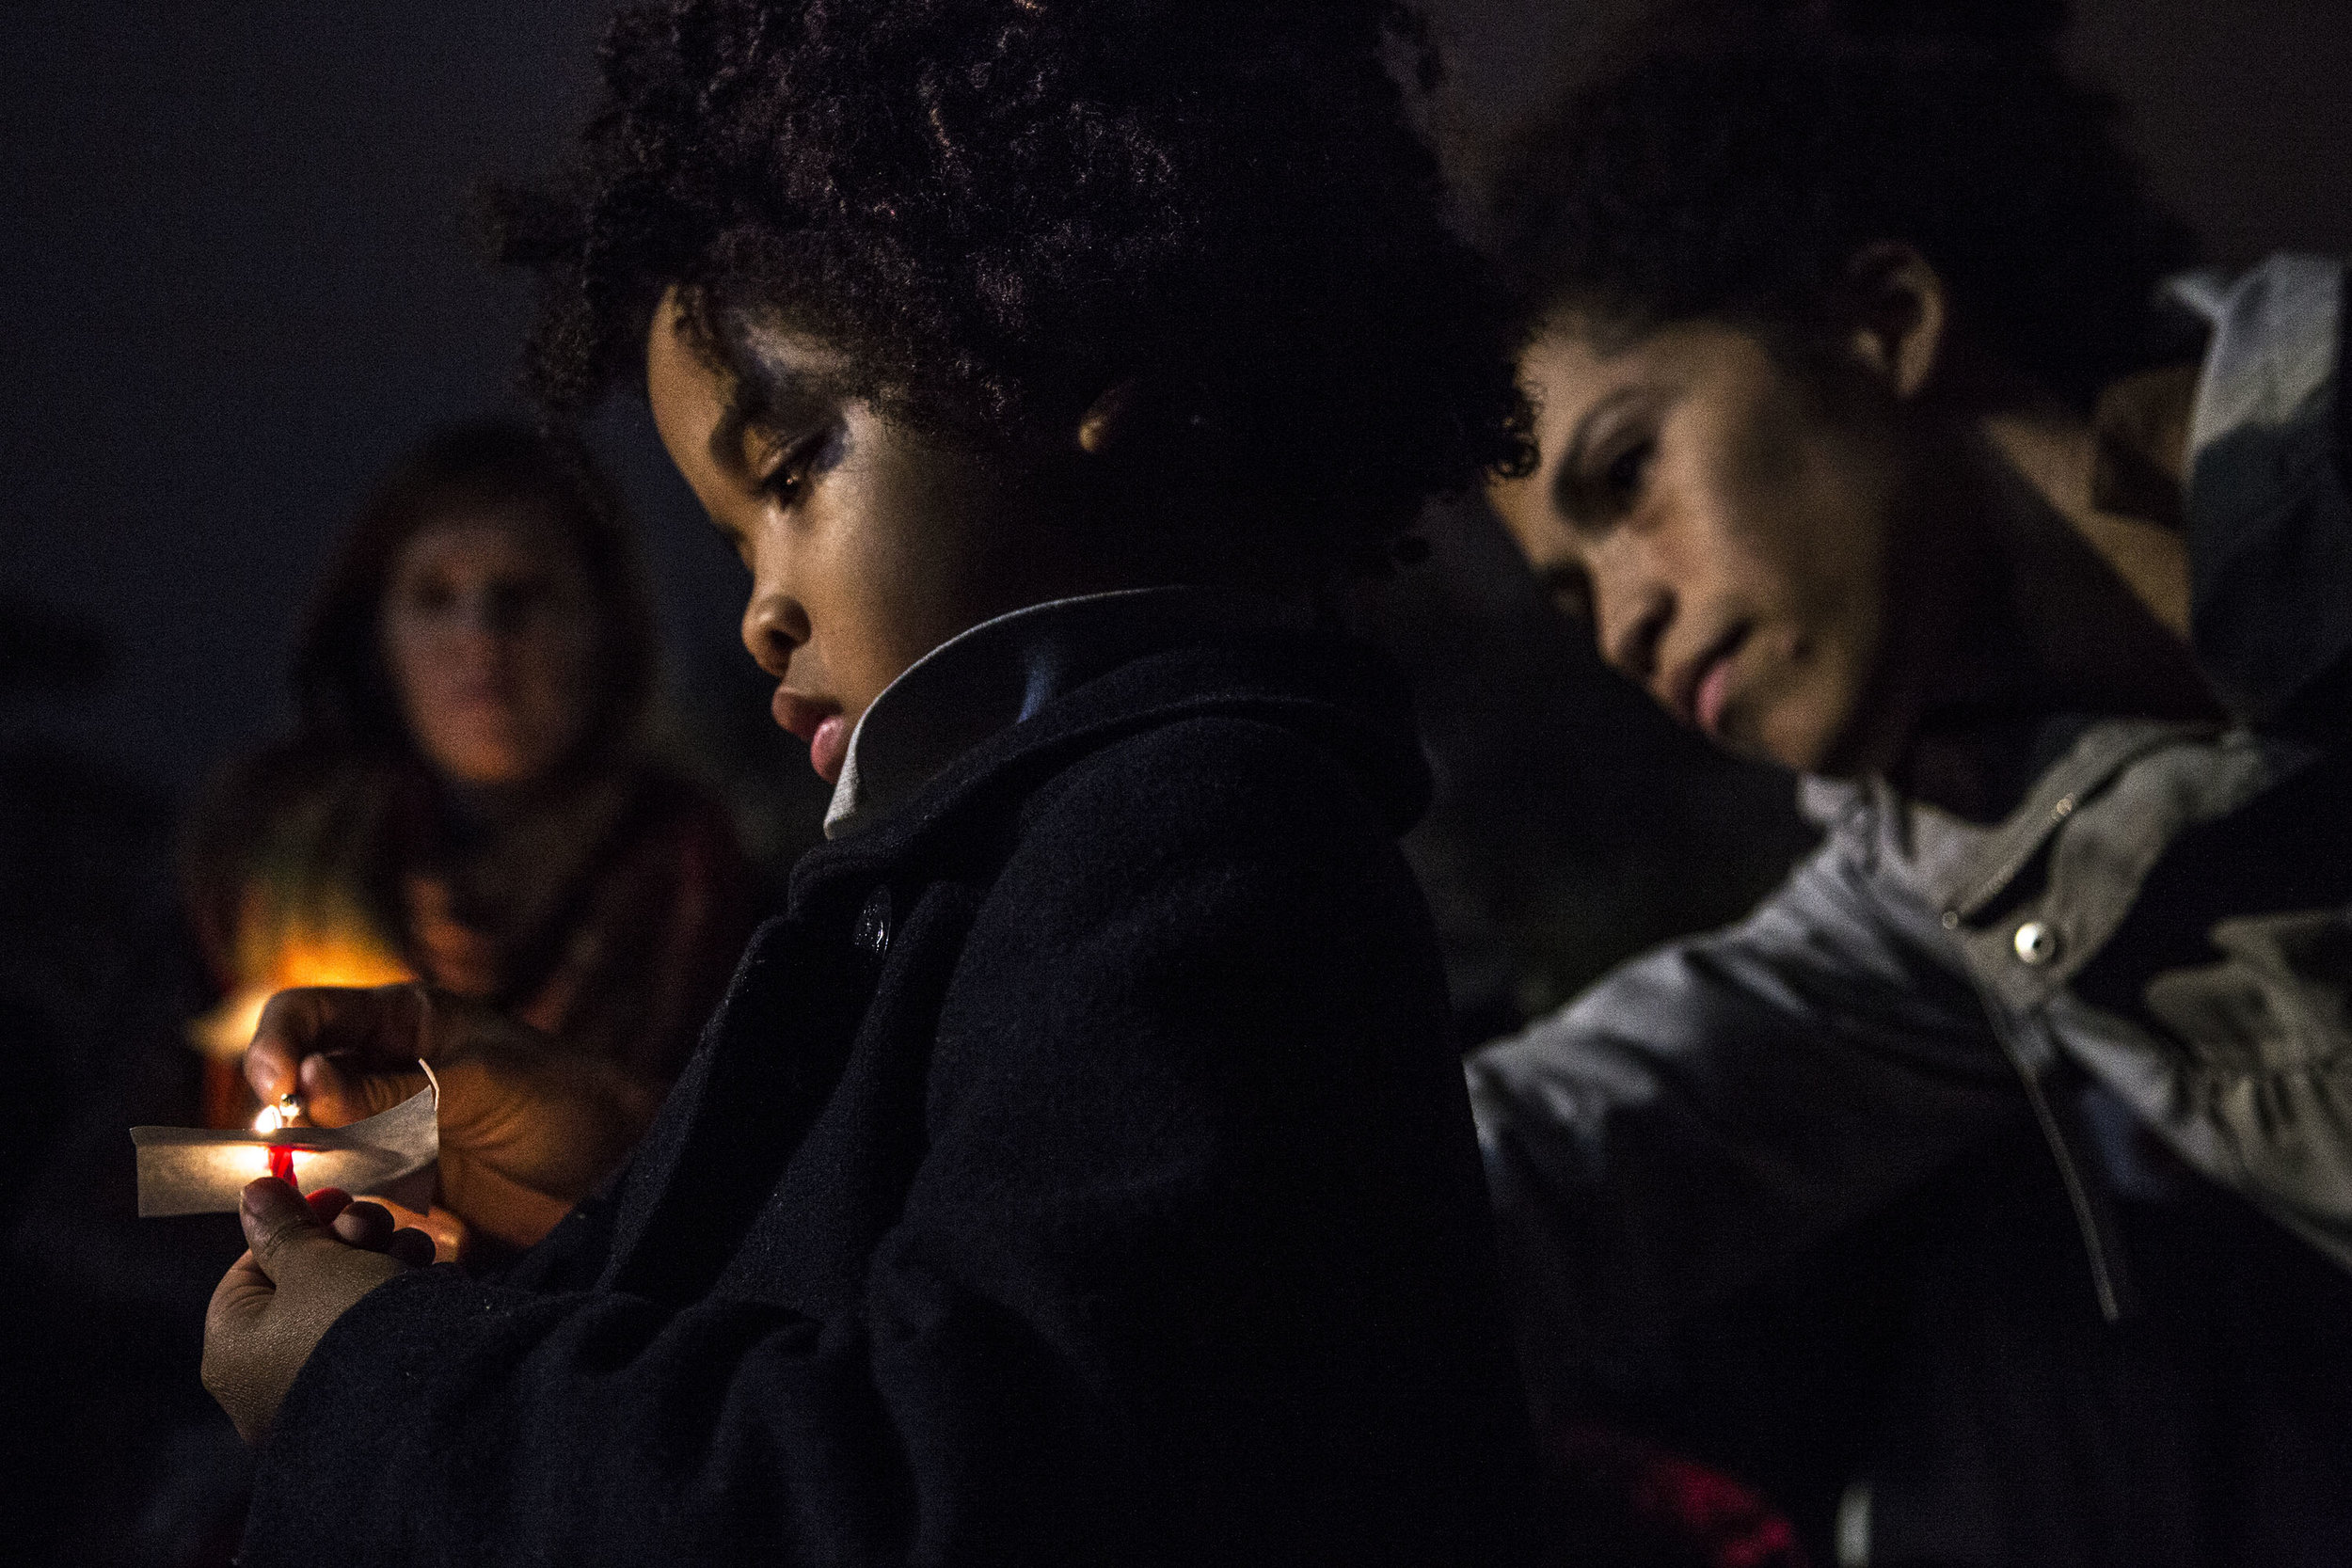   A mother lights the candle of her son during a candlelight vigil outside the White House, the evening after the 2016 presidential election.  